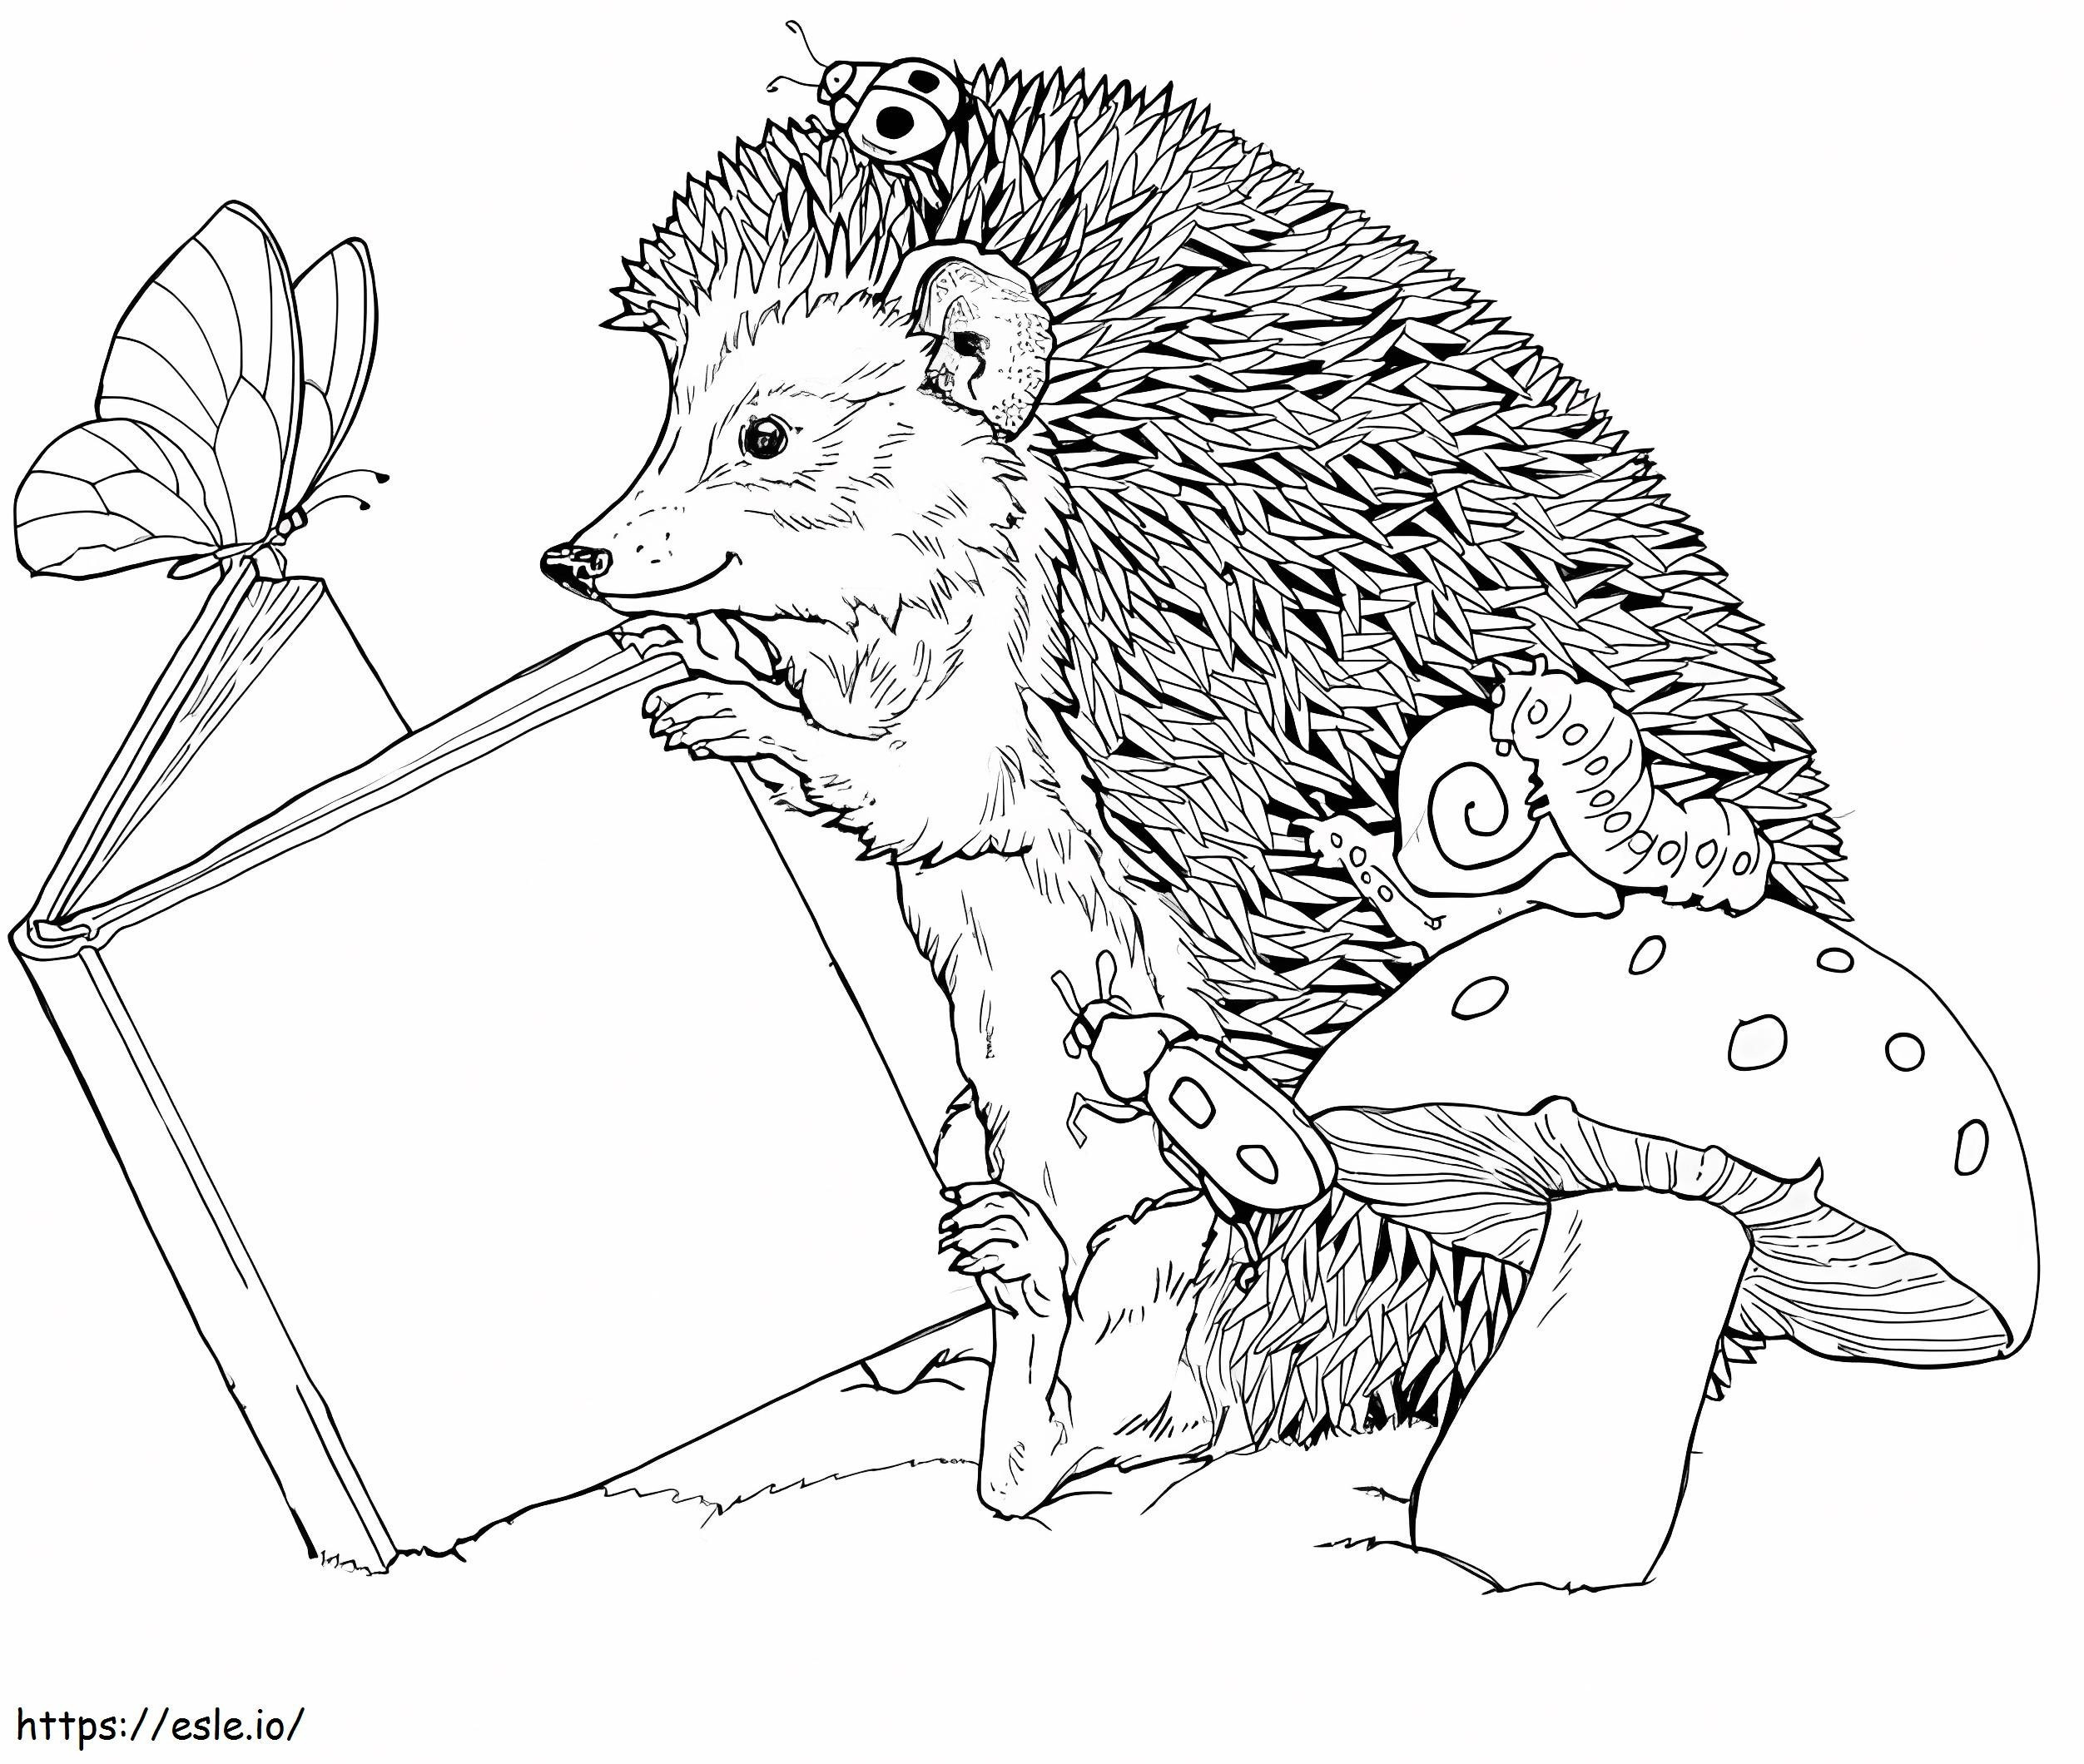 Hedgehog Reading Book coloring page